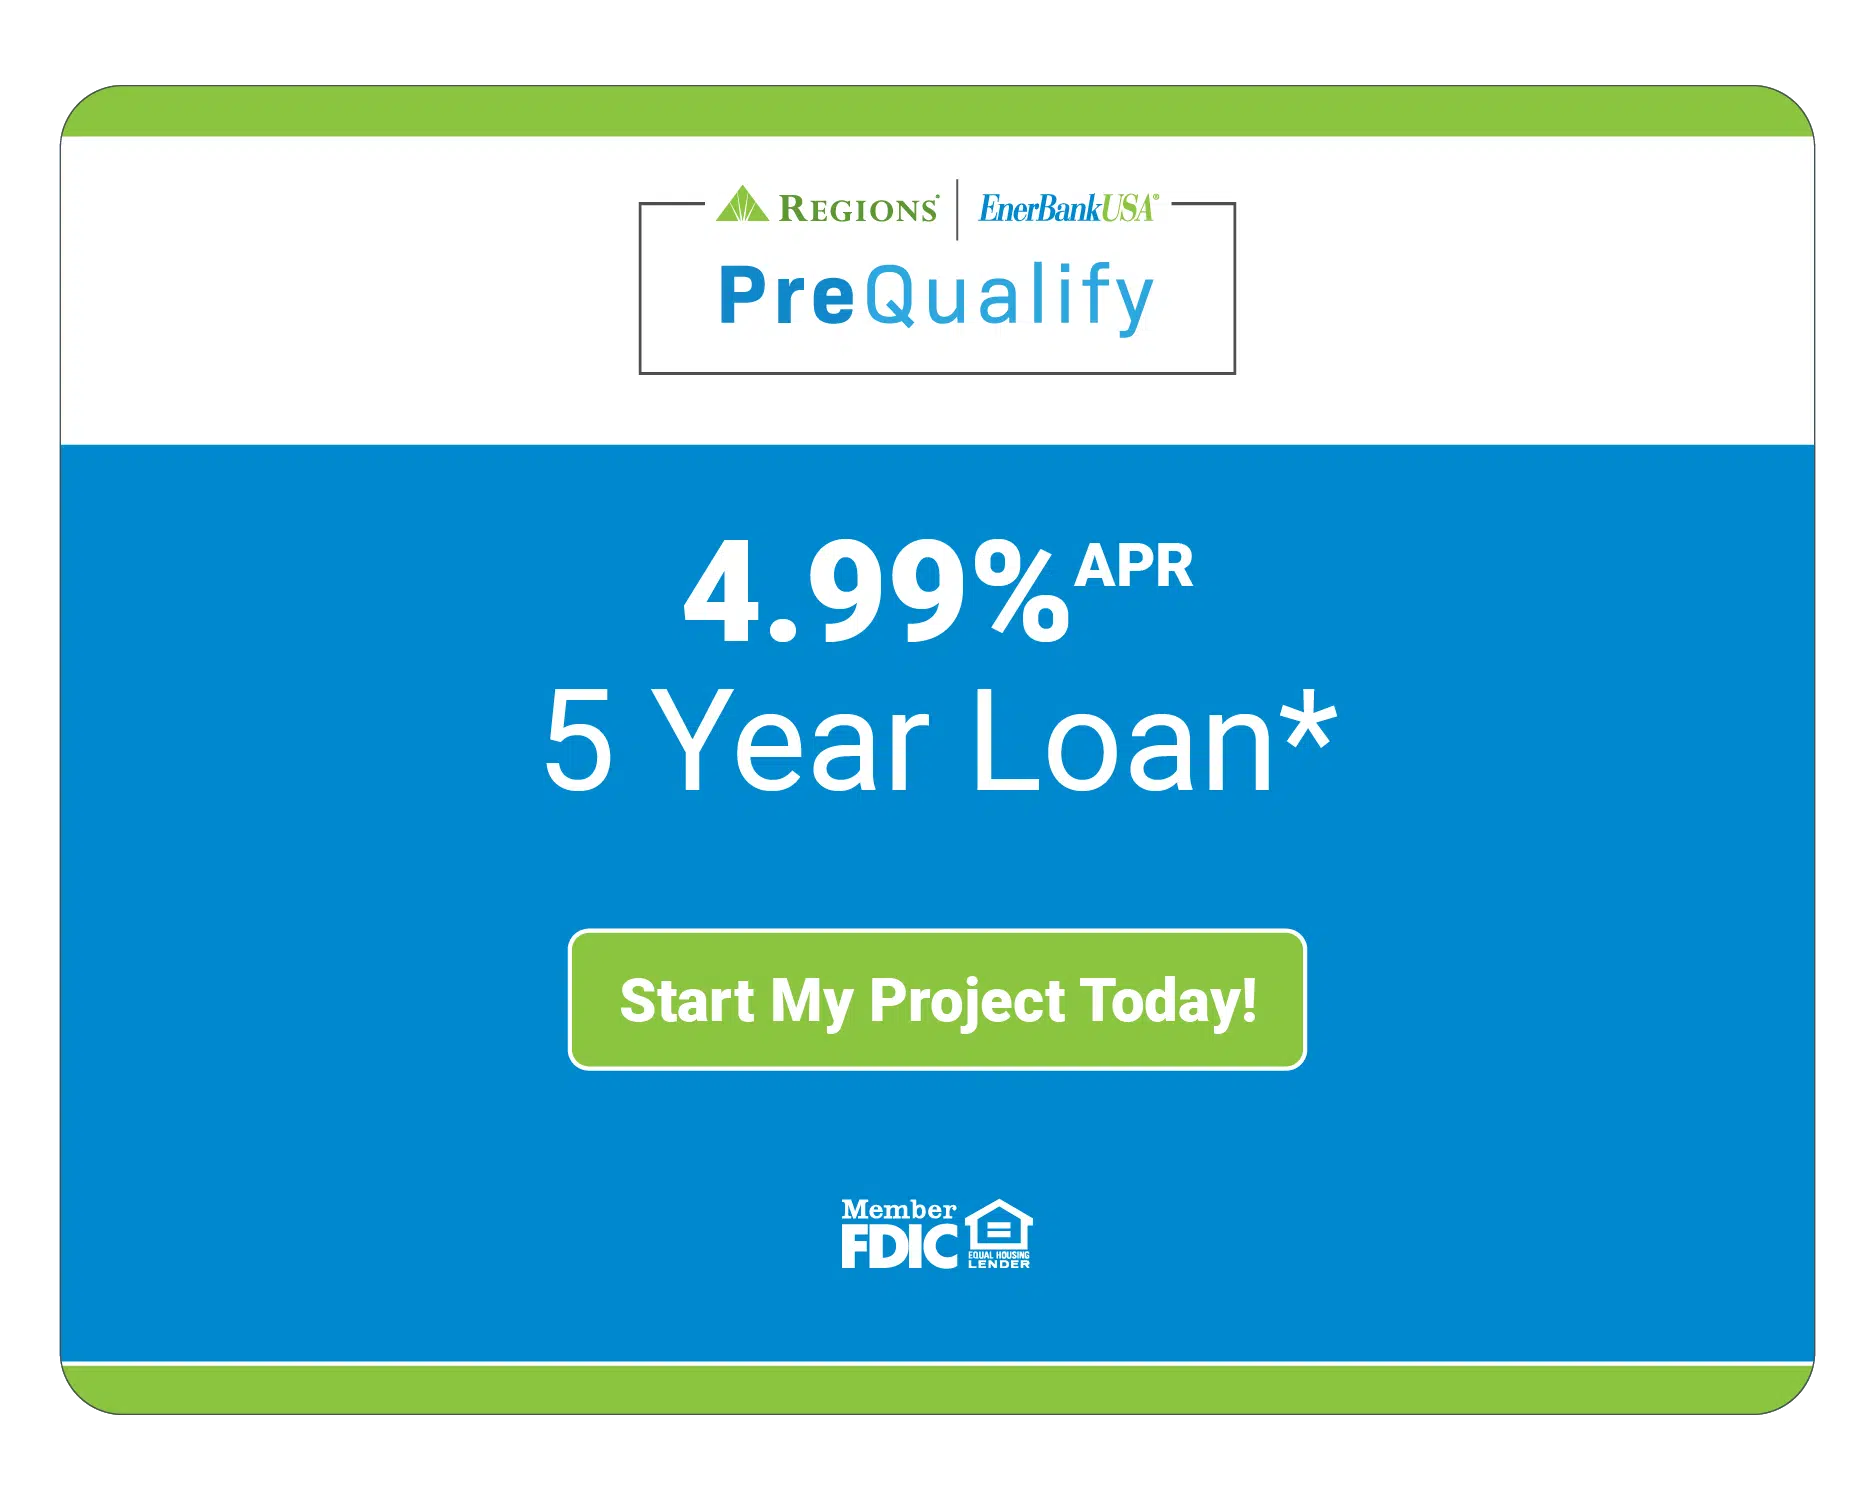 Financing your home project for 5 years - Footprint Decks and Design proudly serves Colorado Springs, Monument, Castlerock, Denver, Peyton, and Black Forrest.